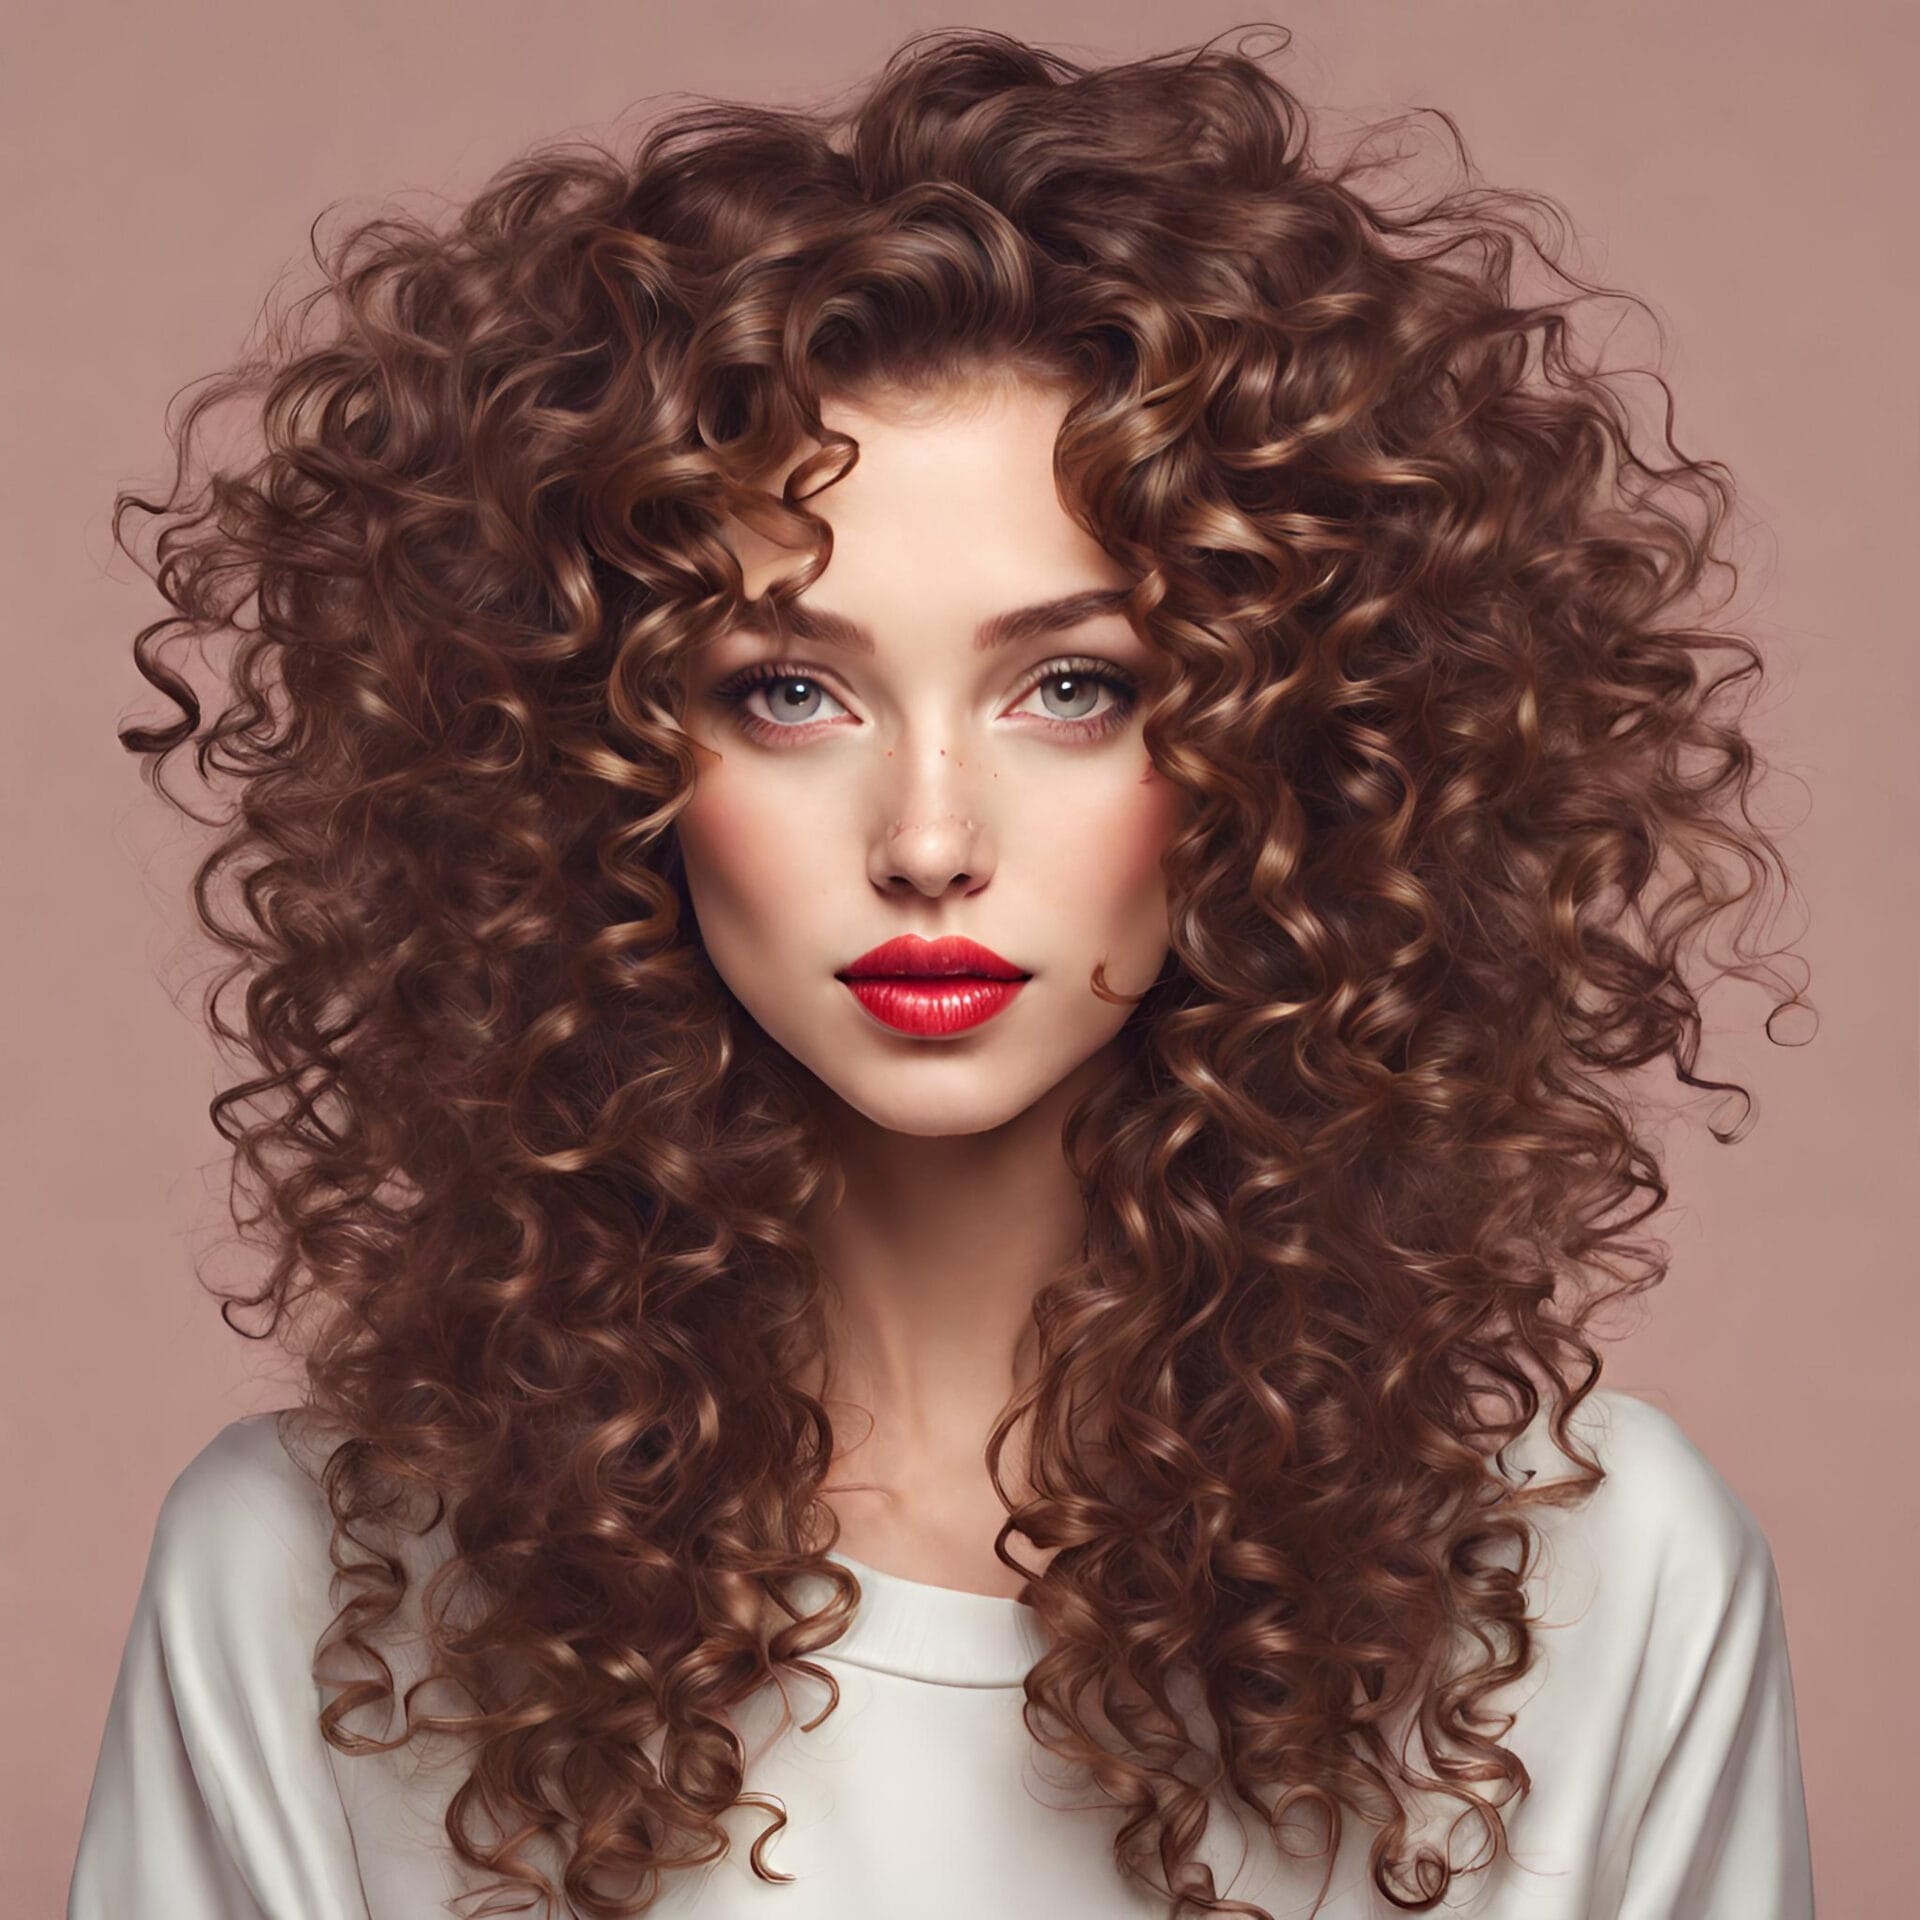 Curly Hair Tips for Heart Shaped Faces